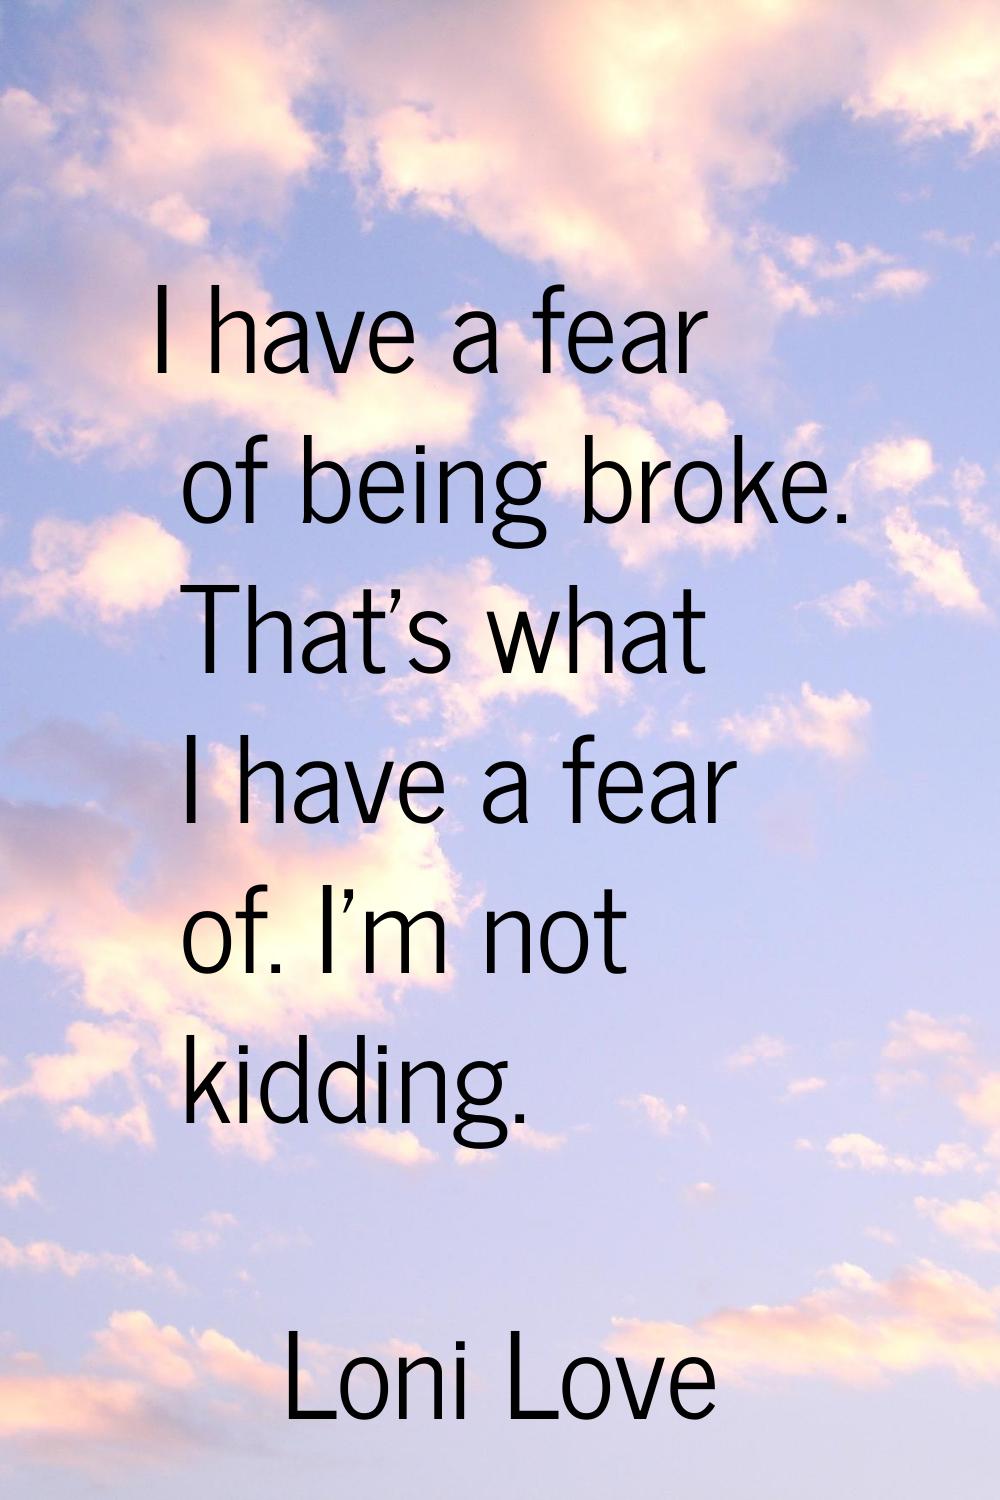 I have a fear of being broke. That's what I have a fear of. I'm not kidding.